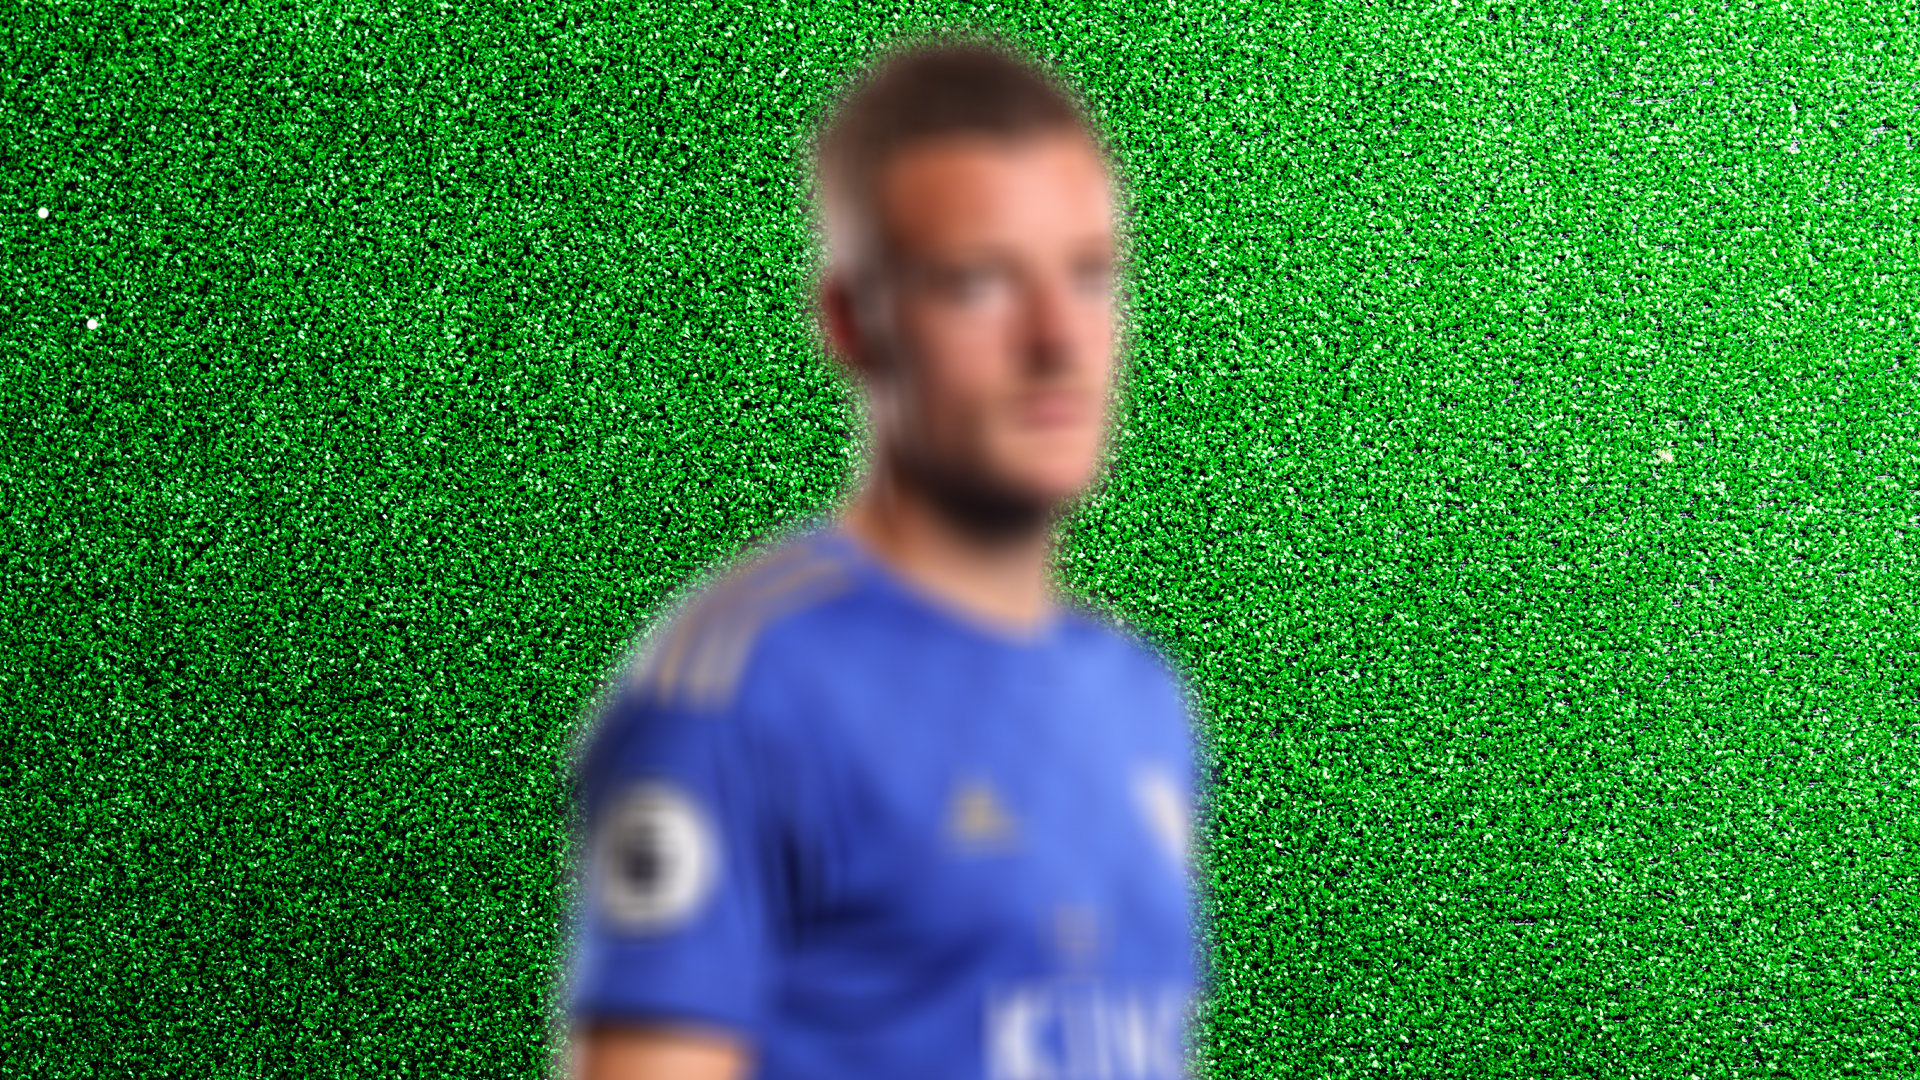 Blurred image of player 9